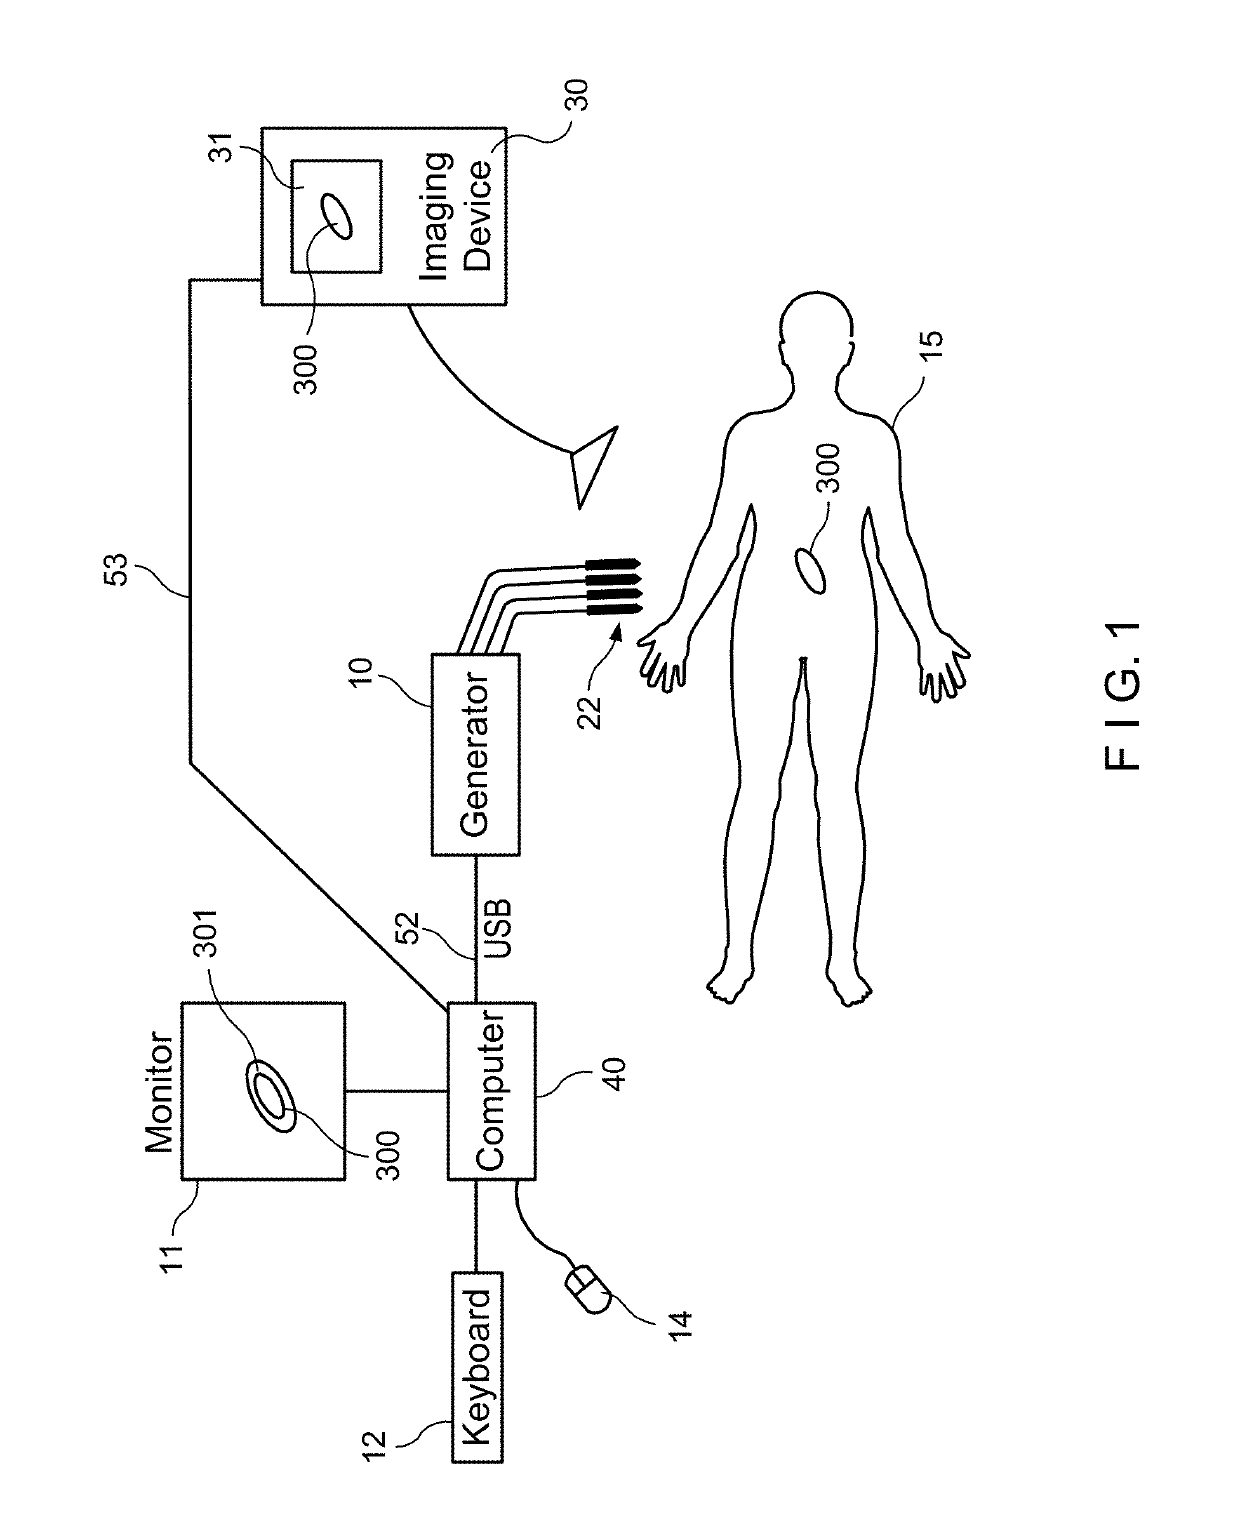 System and method for ablating a tissue site by electroporation with real-time monitoring of treatment progress